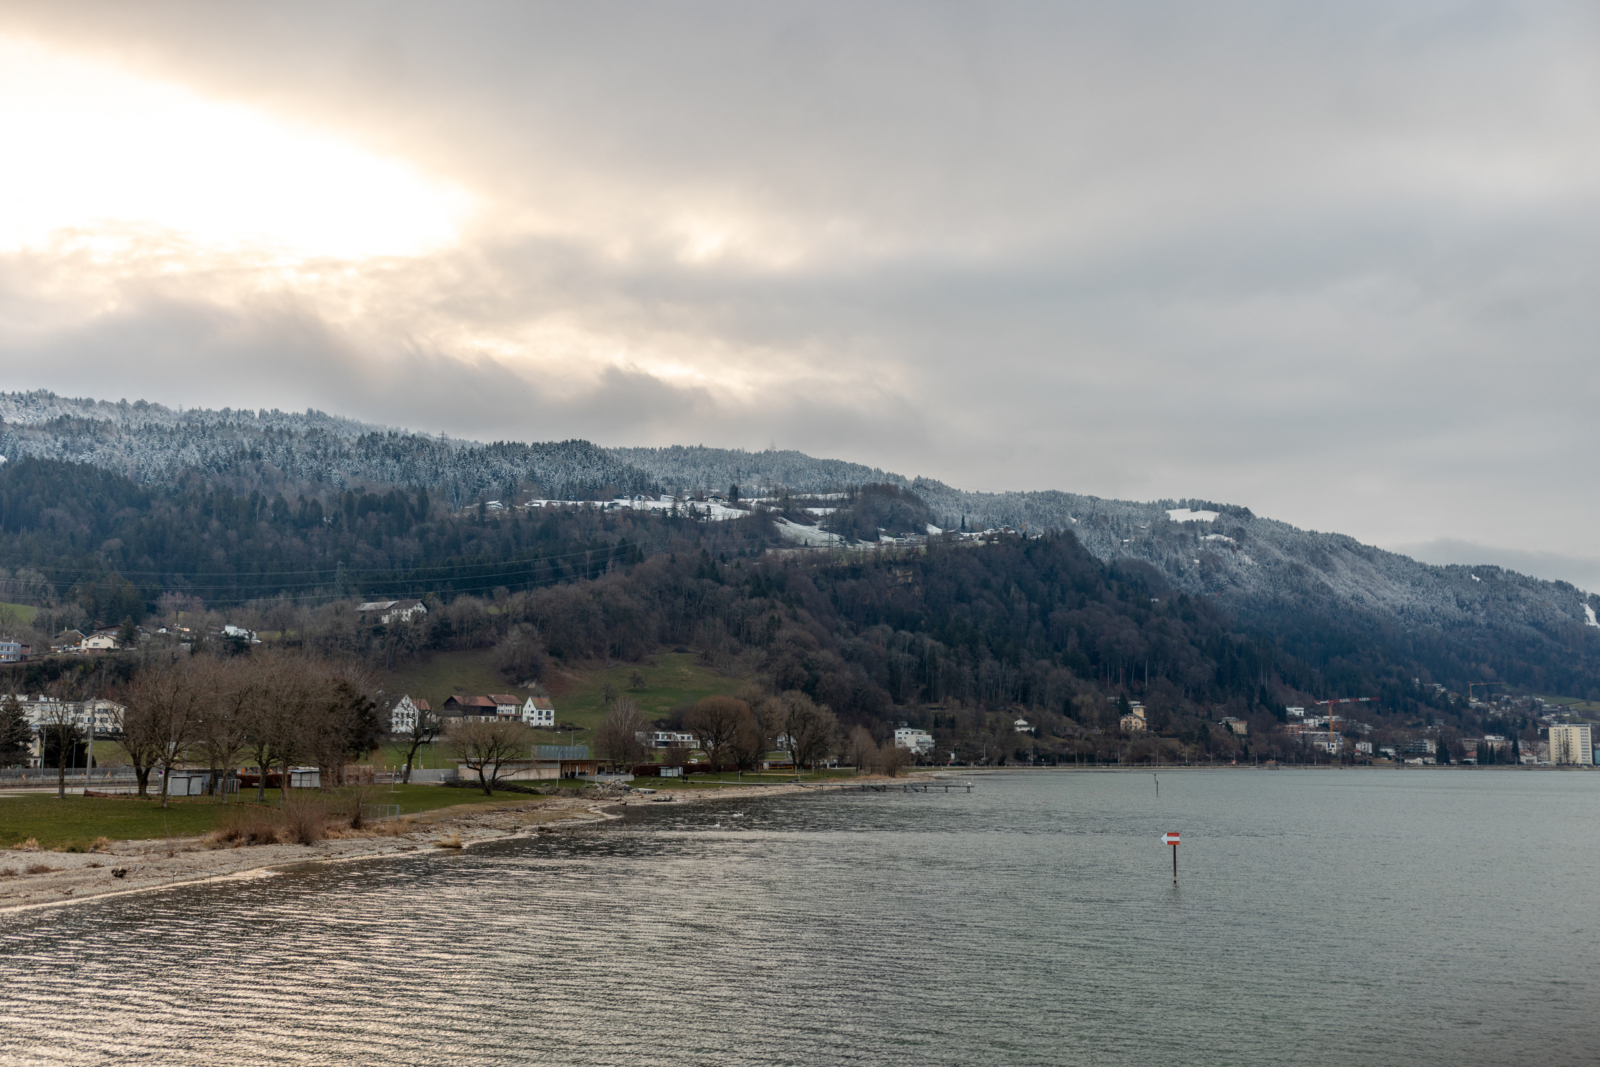 Sunrise at the Lake of Constance